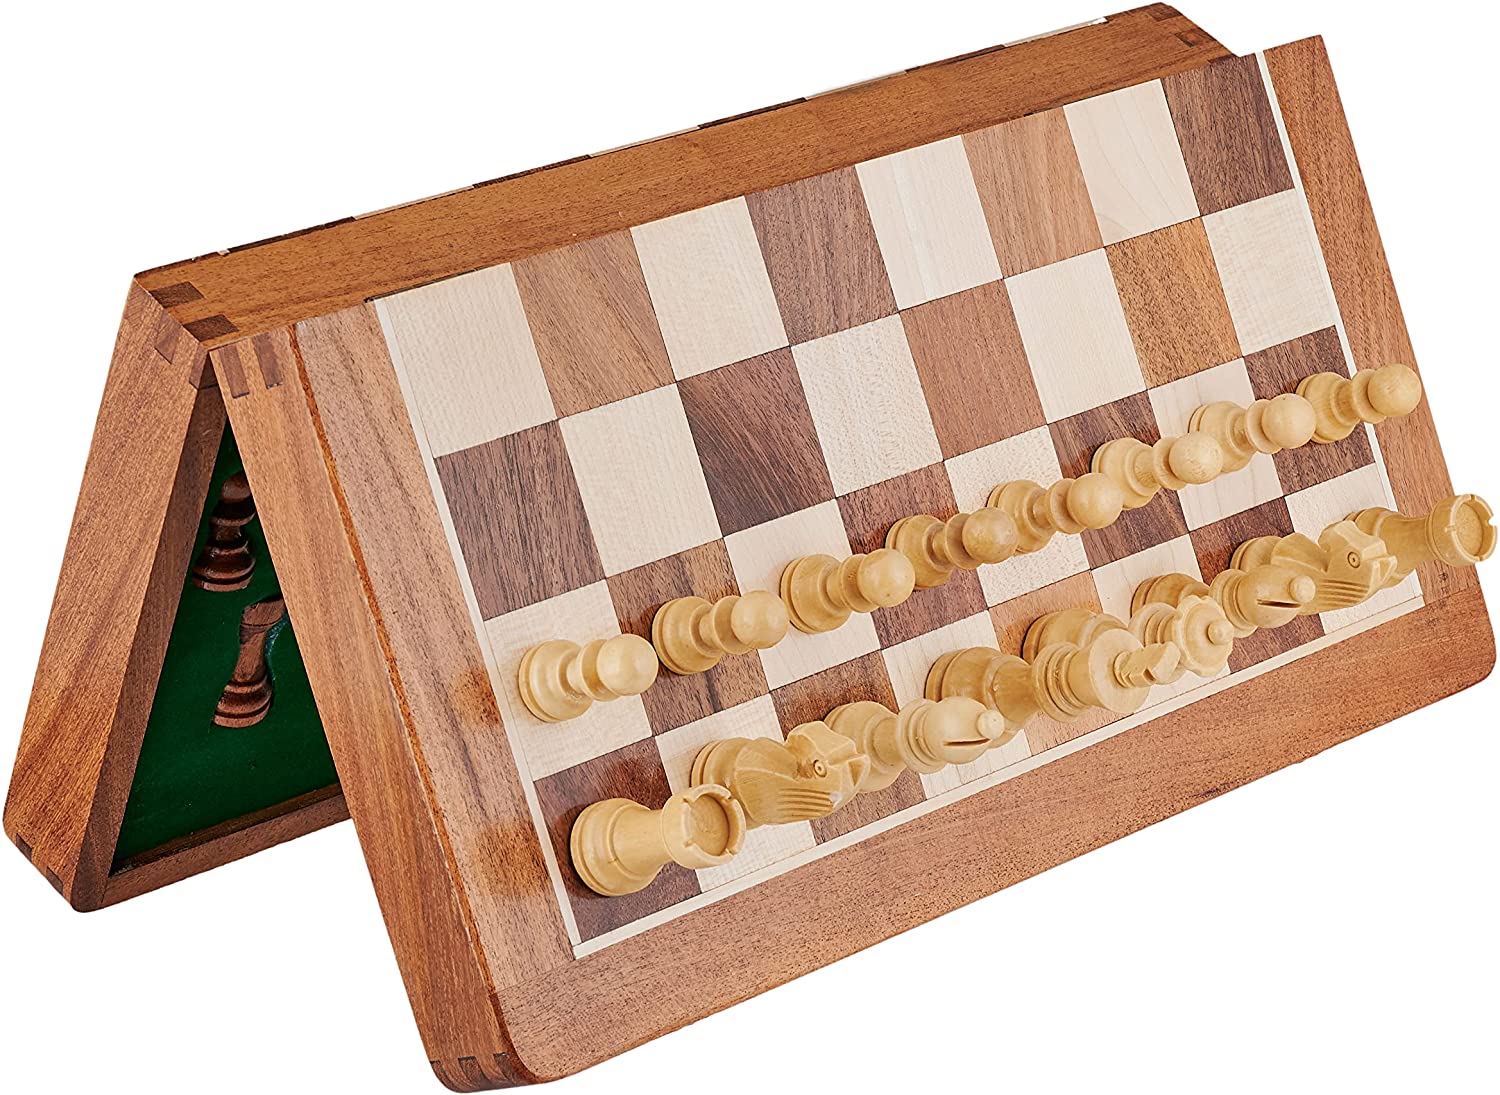 14 Inch Large Wood Magnetic Chess Set with Storage - Folding Wooden Travel Chess Board Game with Chessmen Storage - Handmade Tournament Chess Set - Best Strategy Educational Toy for Adults Teens - image 3 of 9